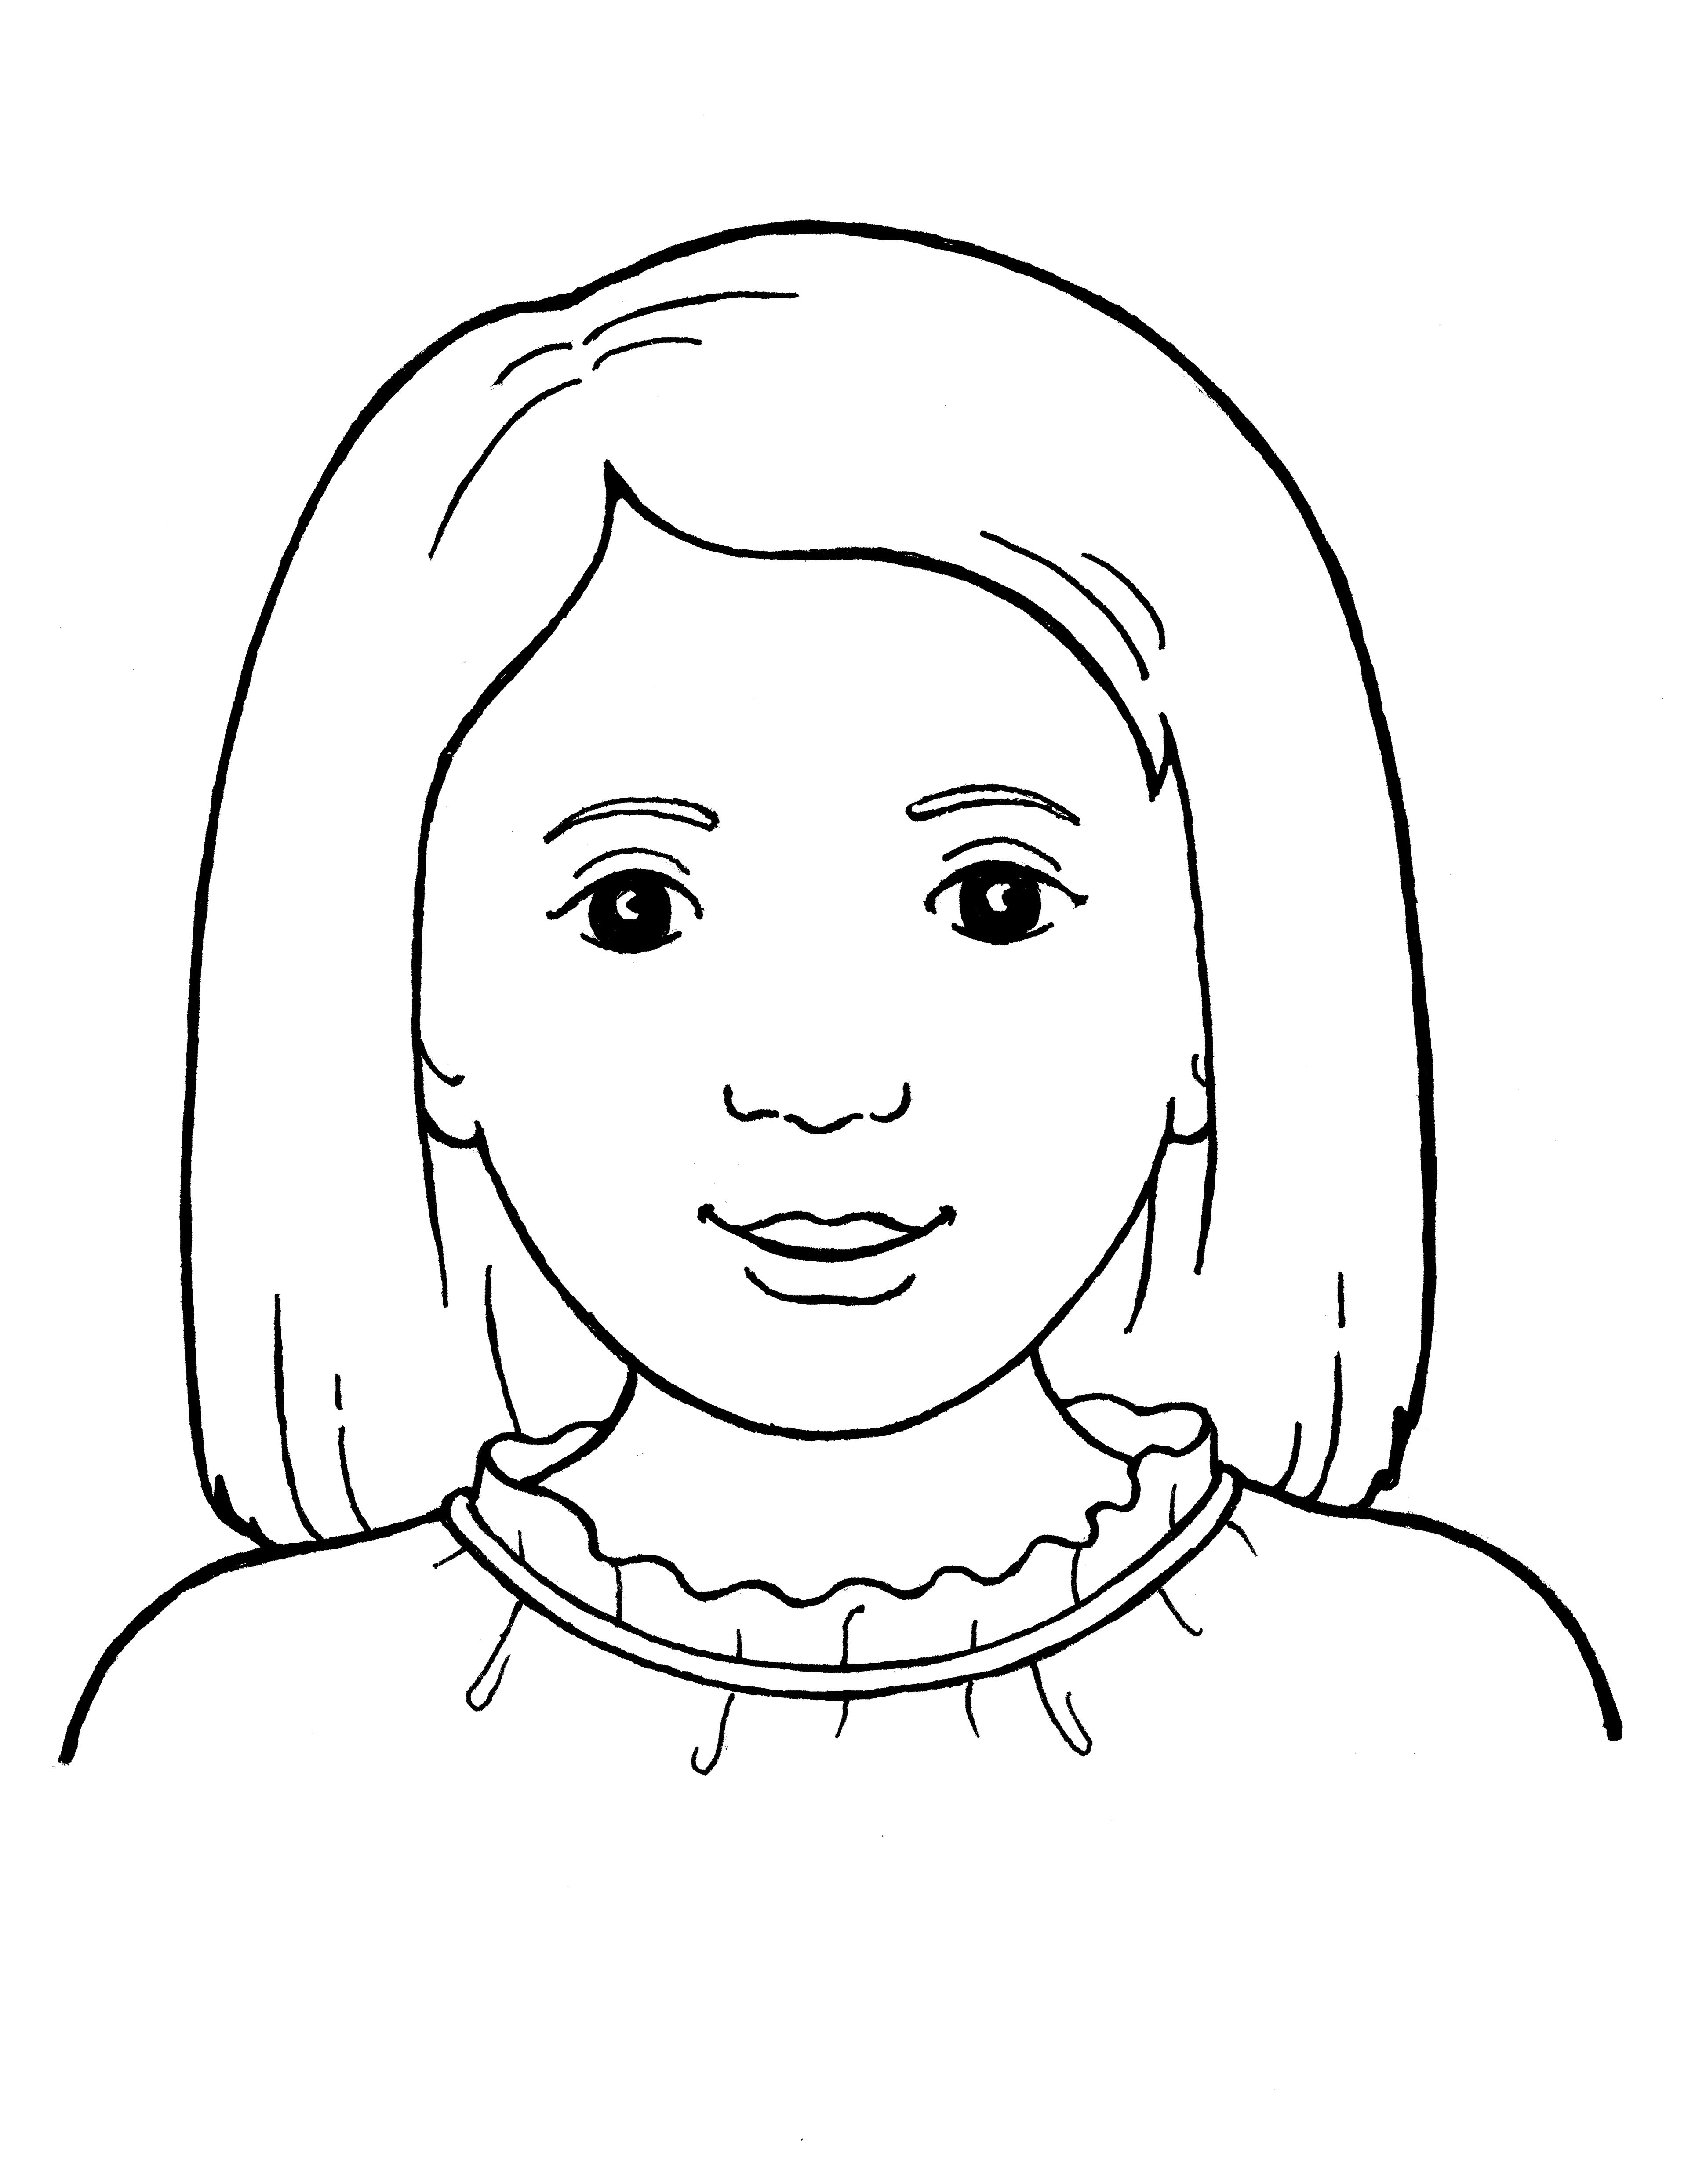 A line drawing of a young Primary girl with brown eyes.